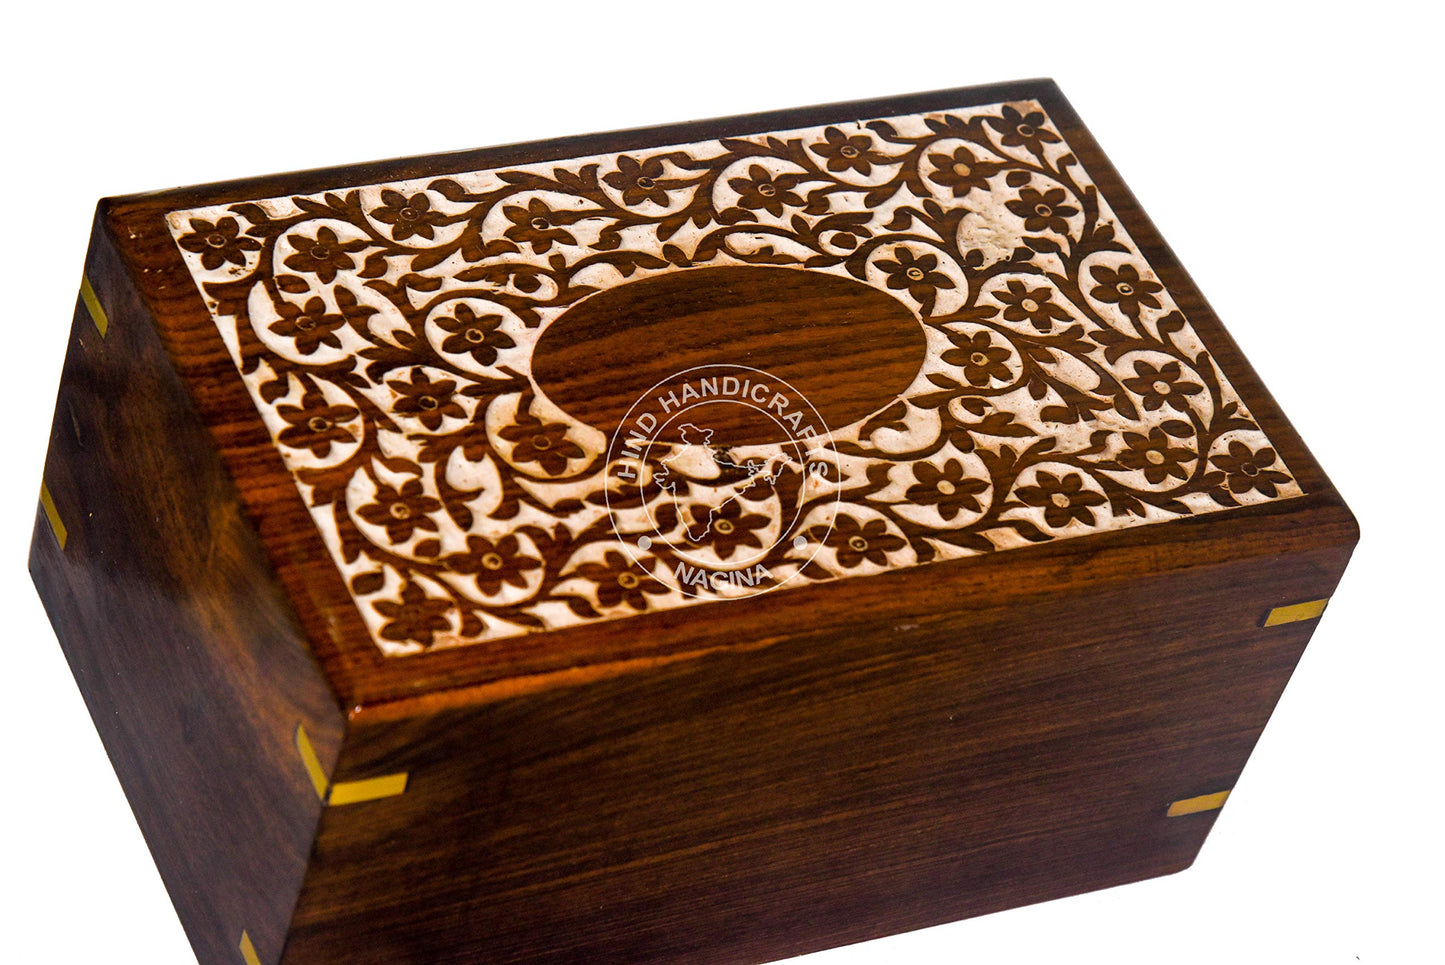 HIND HANDICRAFTS Beautifully Handmade & Handcrafted Rosewood Floral Engraving Wooden Cremation Box/Urns for Human Ashes Adult, Funeral Urn Box (9" x